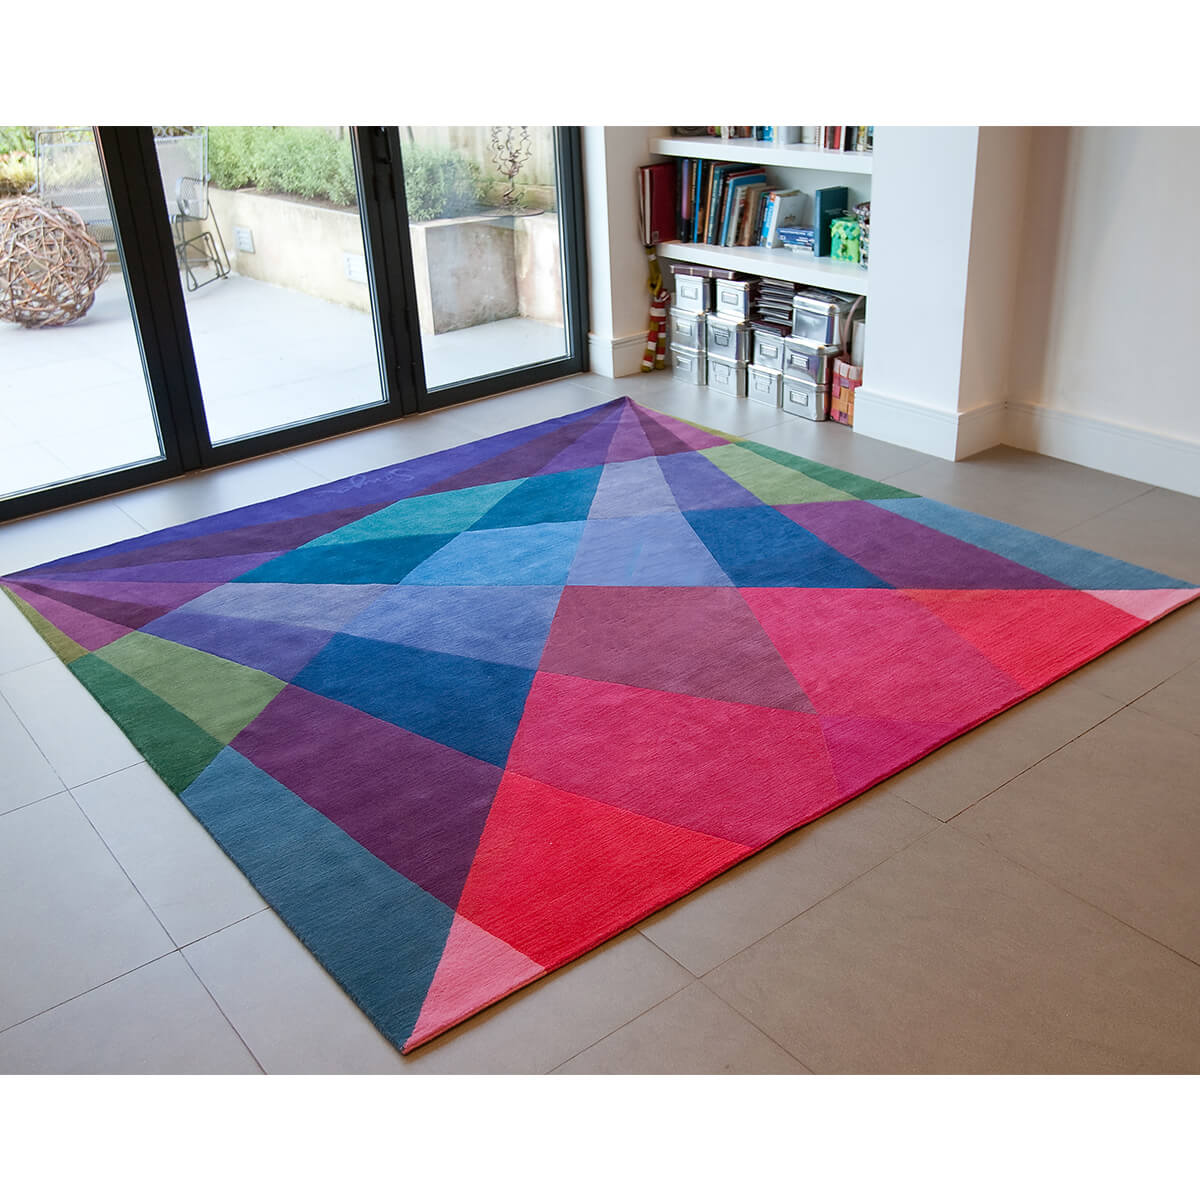 Using large contemporary rugs in your home - Sonya Winner Vibrant